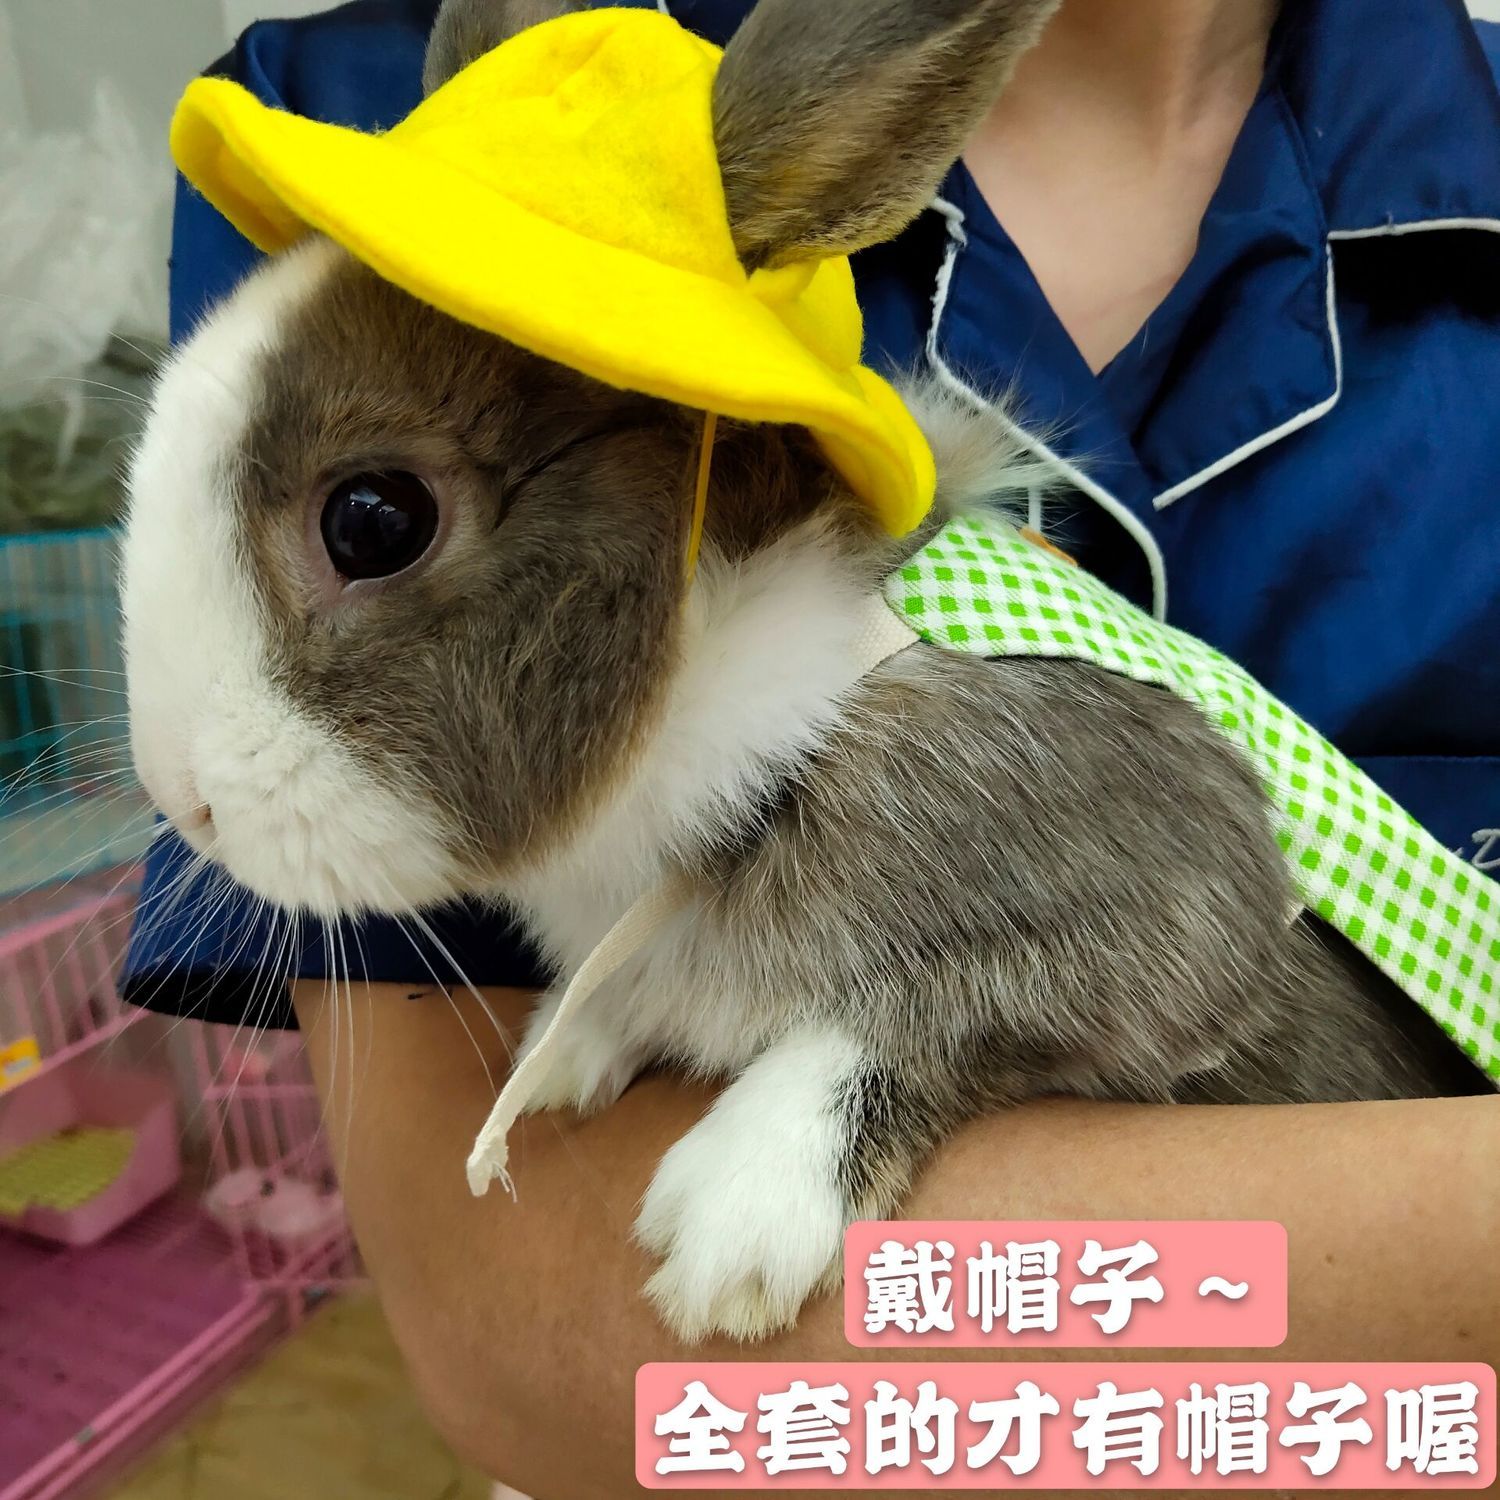 Rabbit cute traction rope slipping rabbit rope dwarf rabbit hat lop ear rabbit clothes rabbit clothes pet rabbit going out